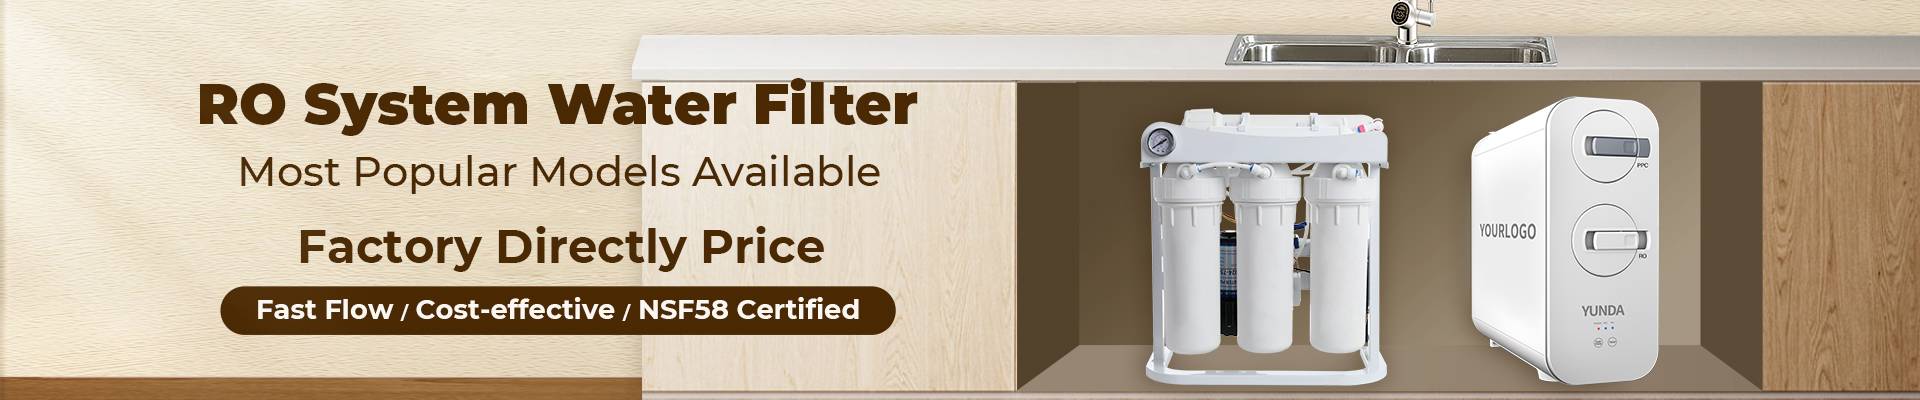 RO Water Filter Systems